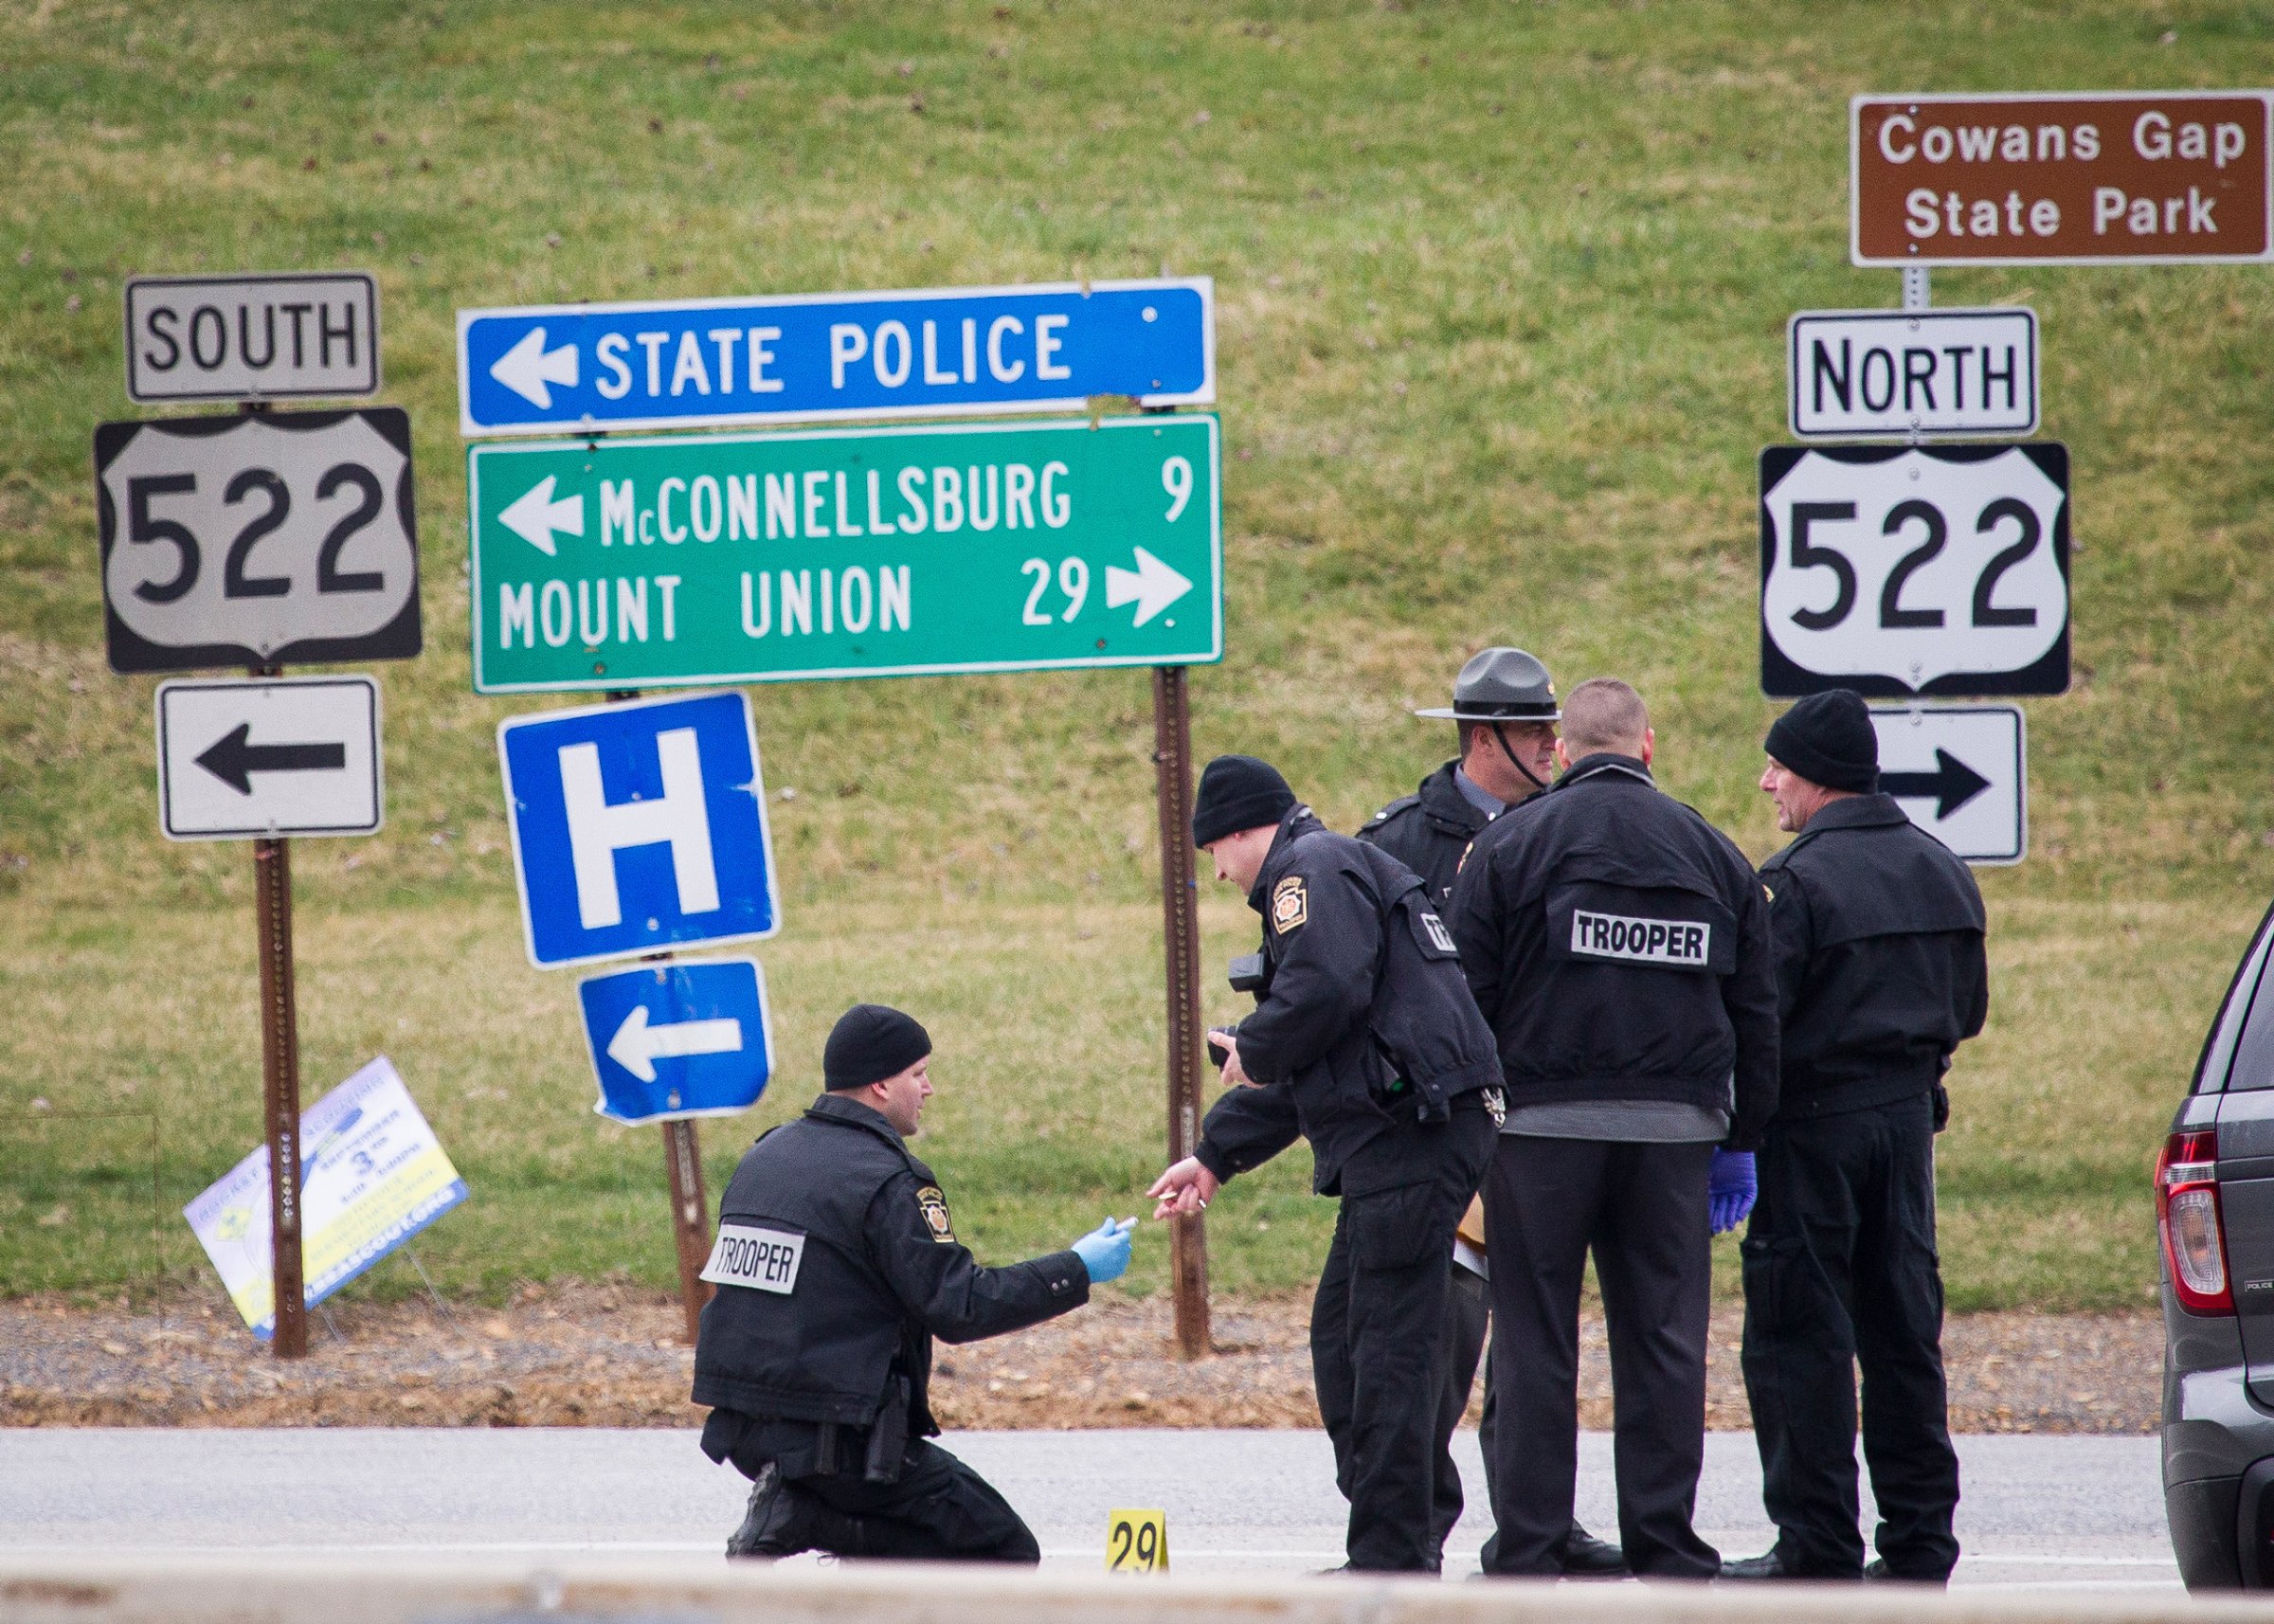 Police investigate at exit 180 off of the Pennsylvania Turnpike, Sunday, March 20, 2016, in Fort Littleton, Pa. A retired state trooper killed a turnpike toll collector and a security guard in a holdup attempt at a toll plaza and then was shot dead by troopers while trying to escape with the money, authorities said. (Daniel Zampogna/PennLive.com via AP) MANDATORY CREDIT; MAGS OUT